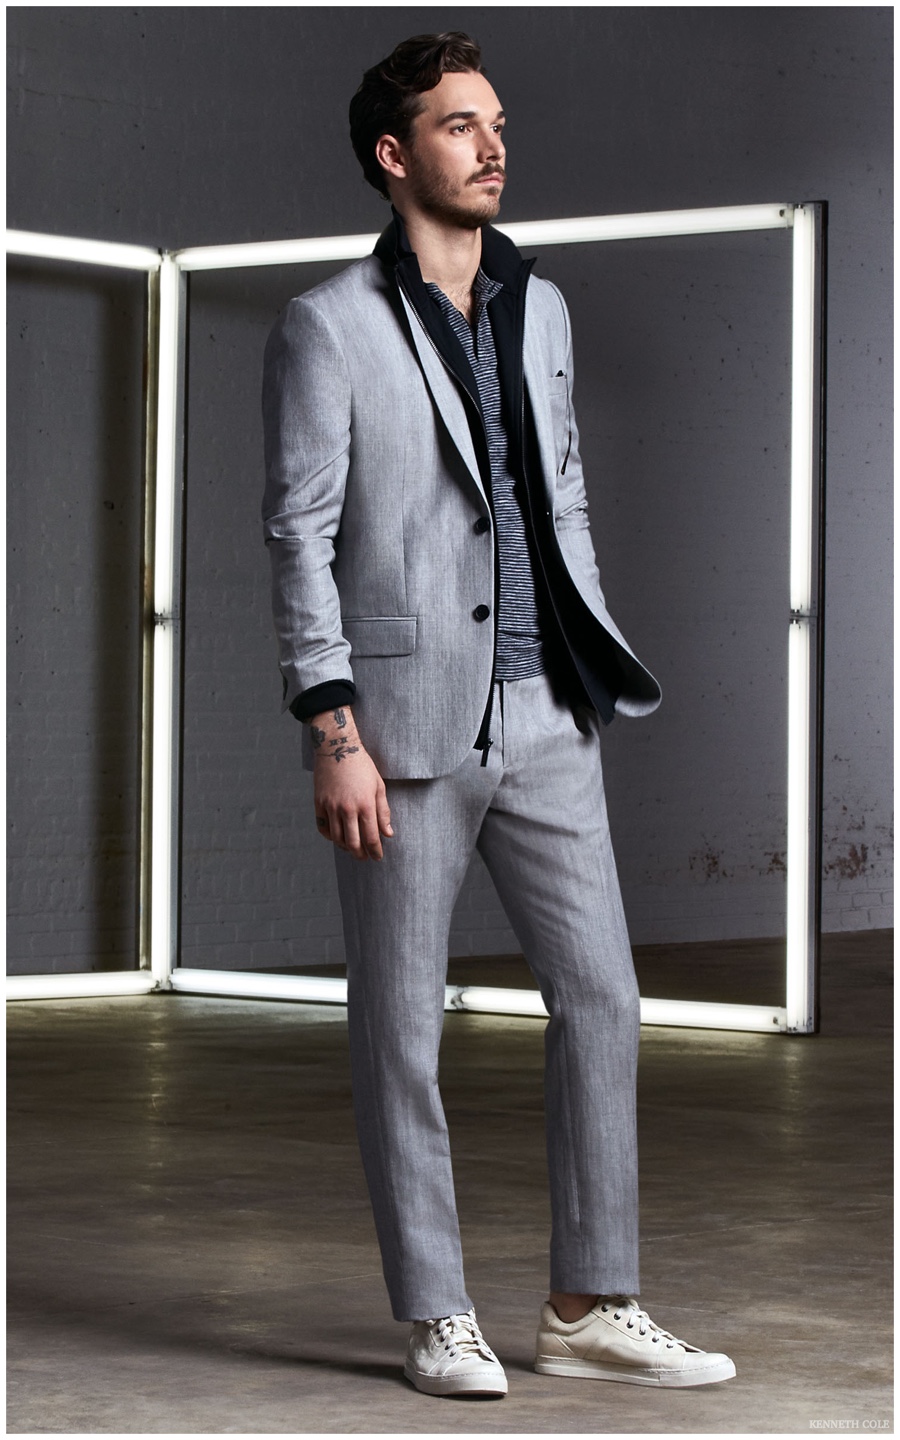 Kenneth Cole Spring/Summer 2015 Menswear Collection